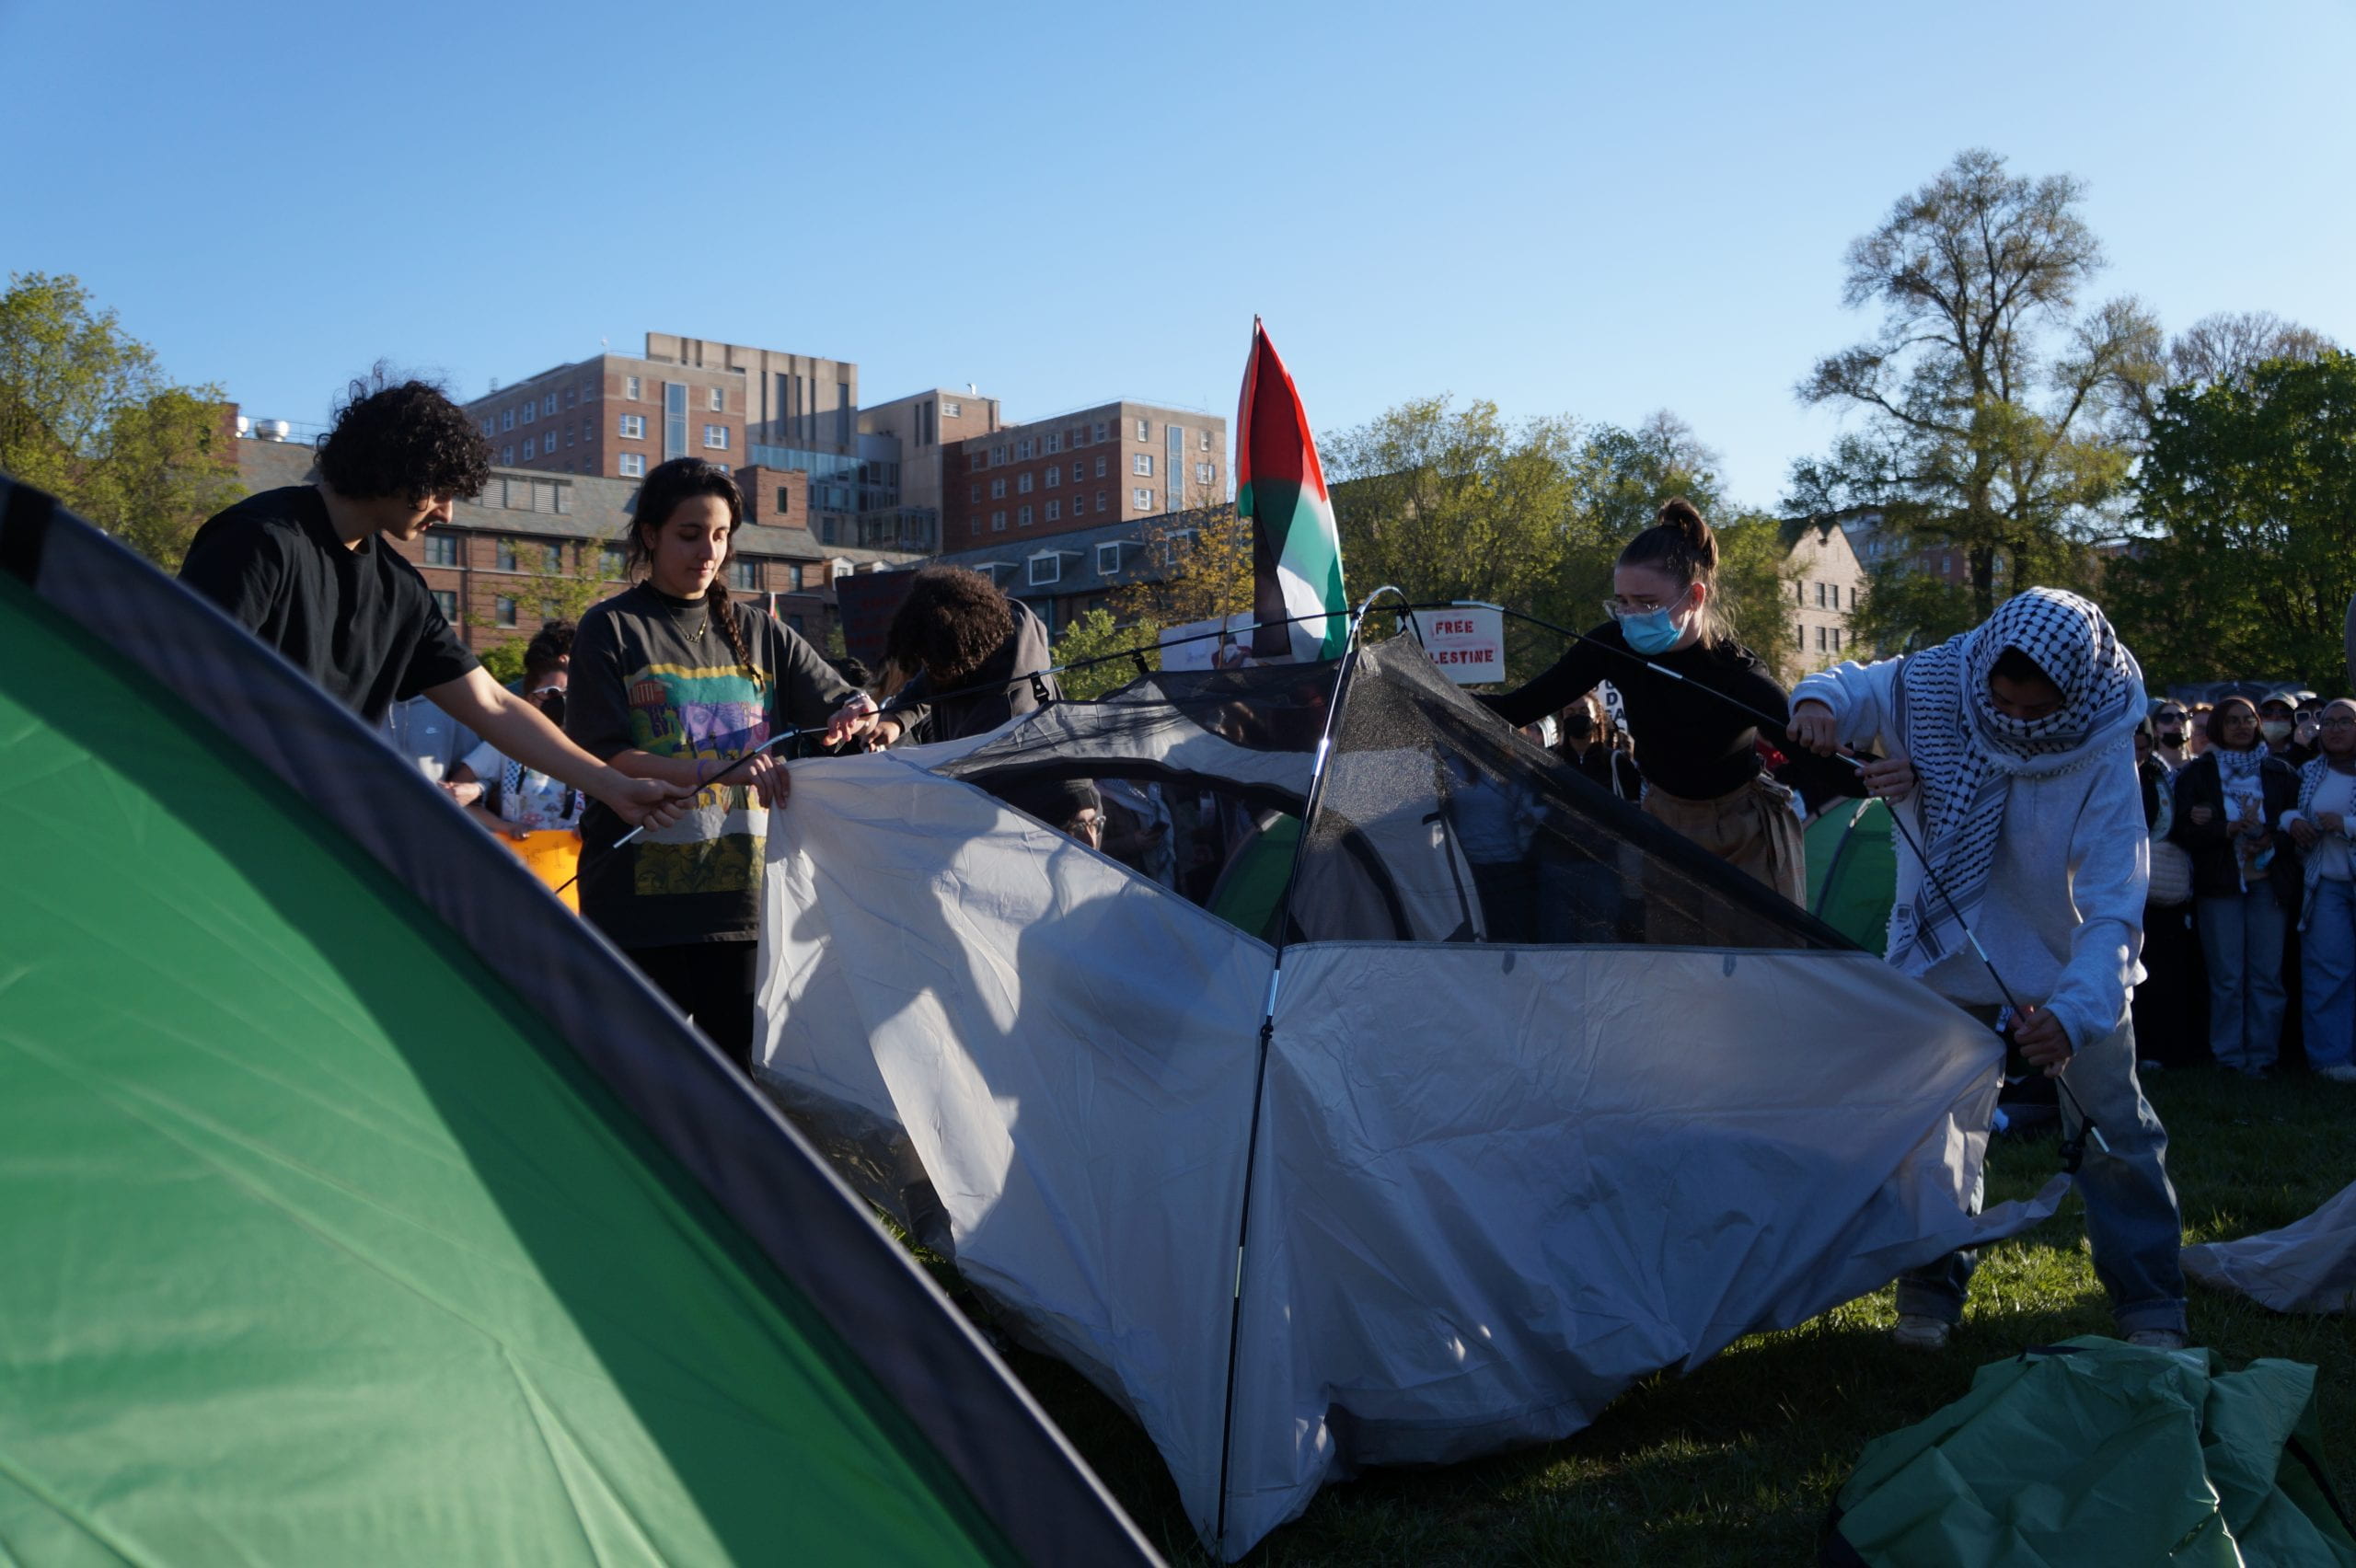 University President Ted Carter Jr. released a statement on Monday that specifically discussed how encampments violate the university's space rules. Credit: Sebastian Griffith